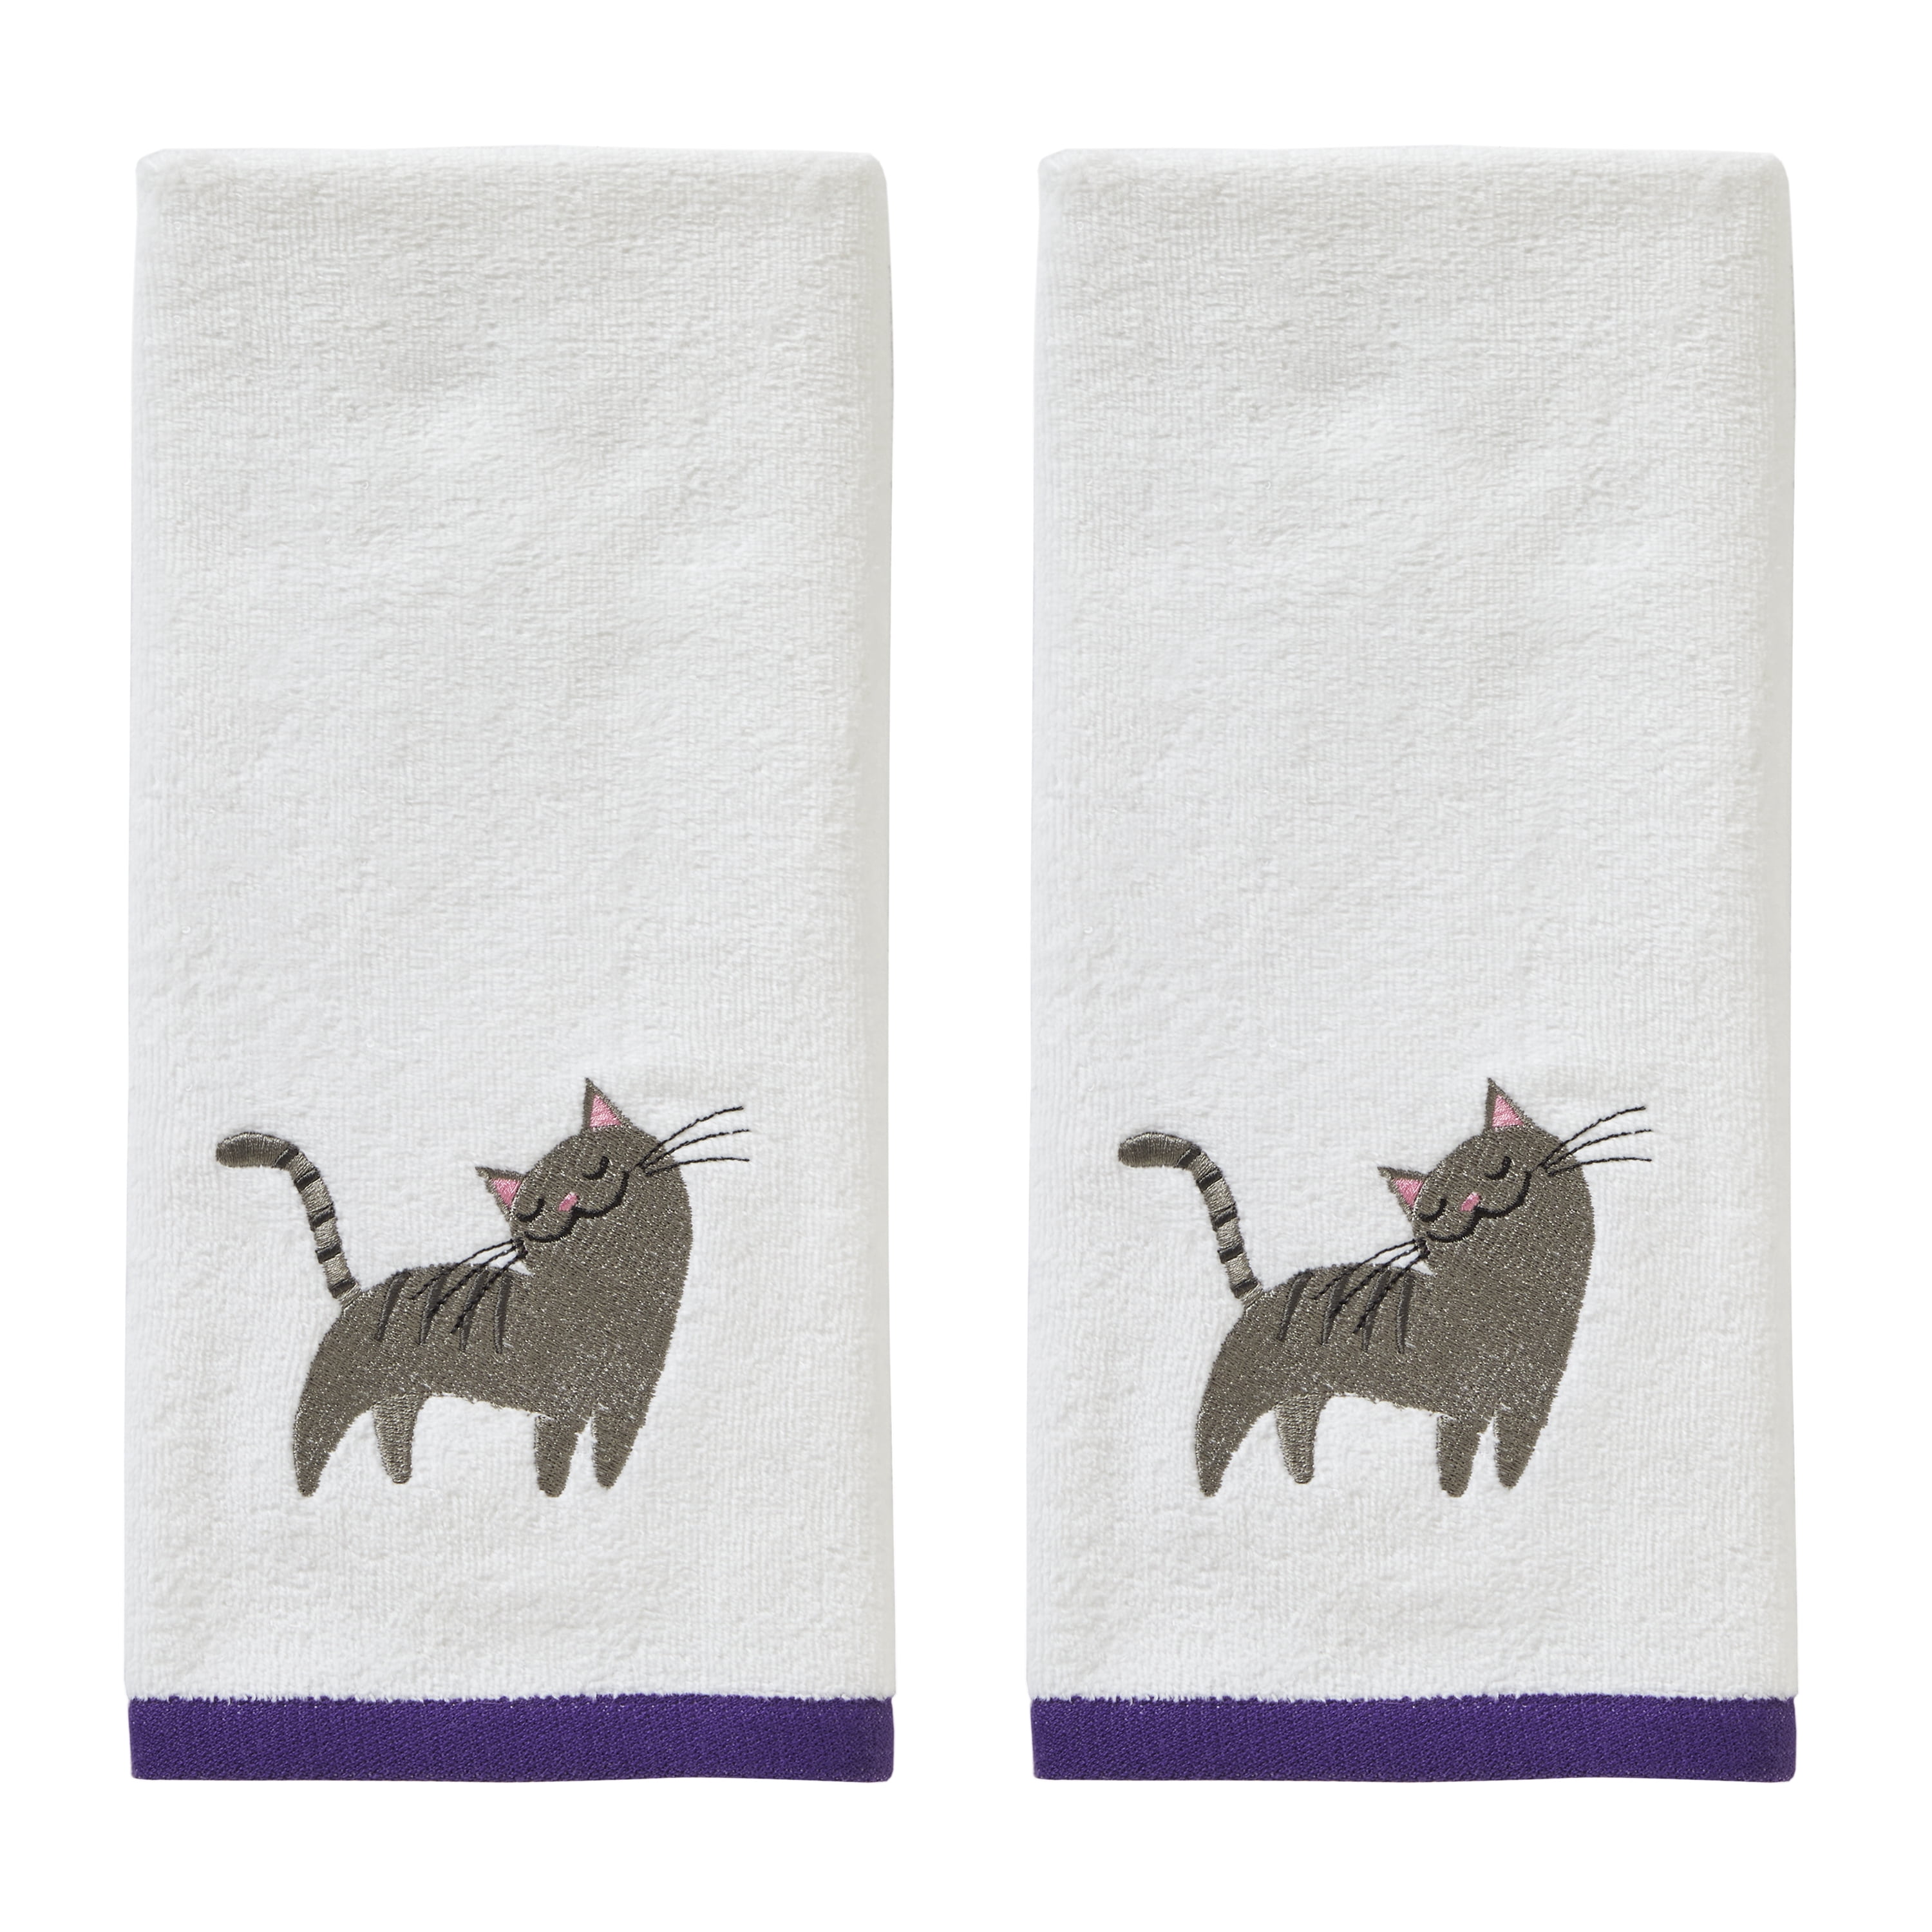 HANG IN THERE CAT SET OF 2 HAND TOWELS EMBROIDERED by laura 